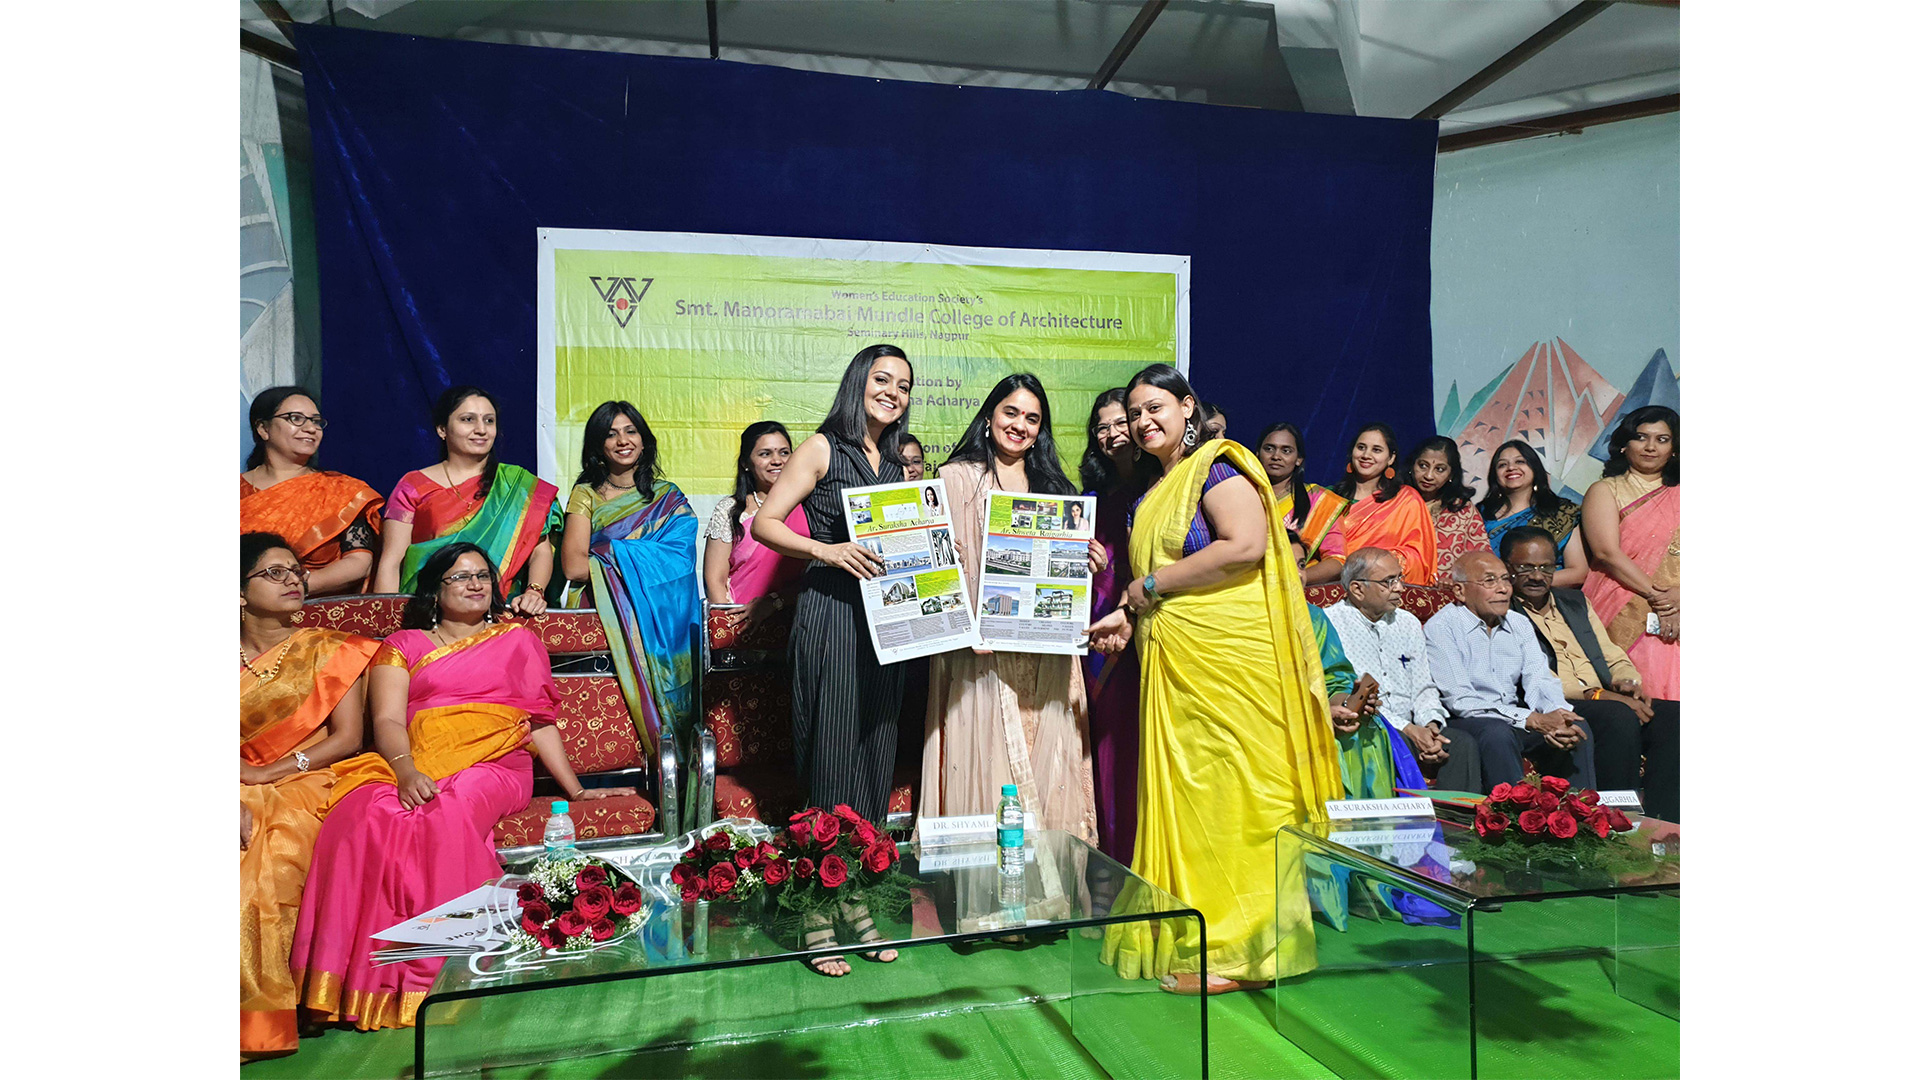 Smt. Manoramabai Mundle College of Architecture | Women’s Day